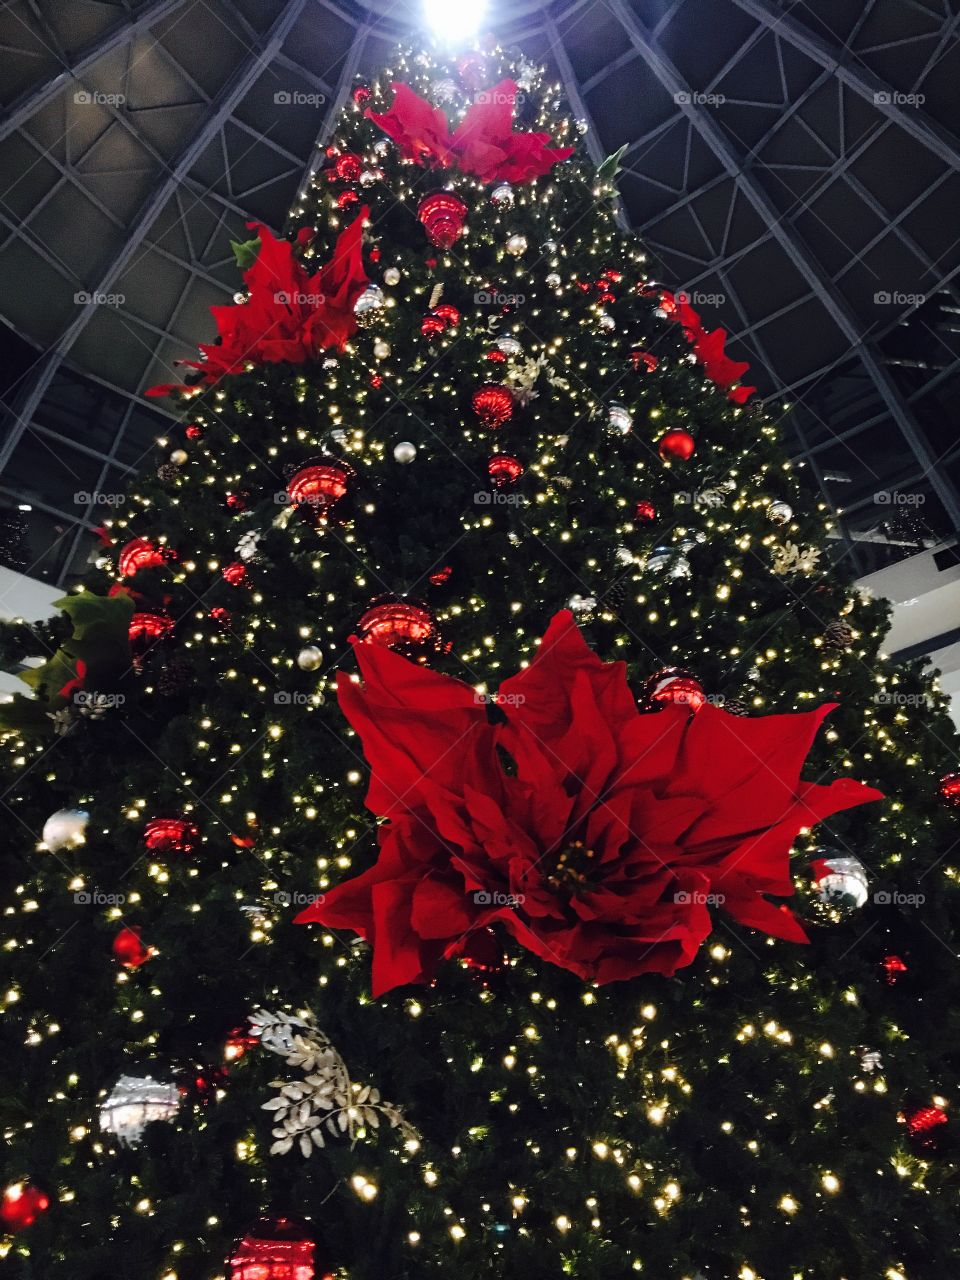 Giant indoor Christmas tree at One Liberty Place in Philadelphia 